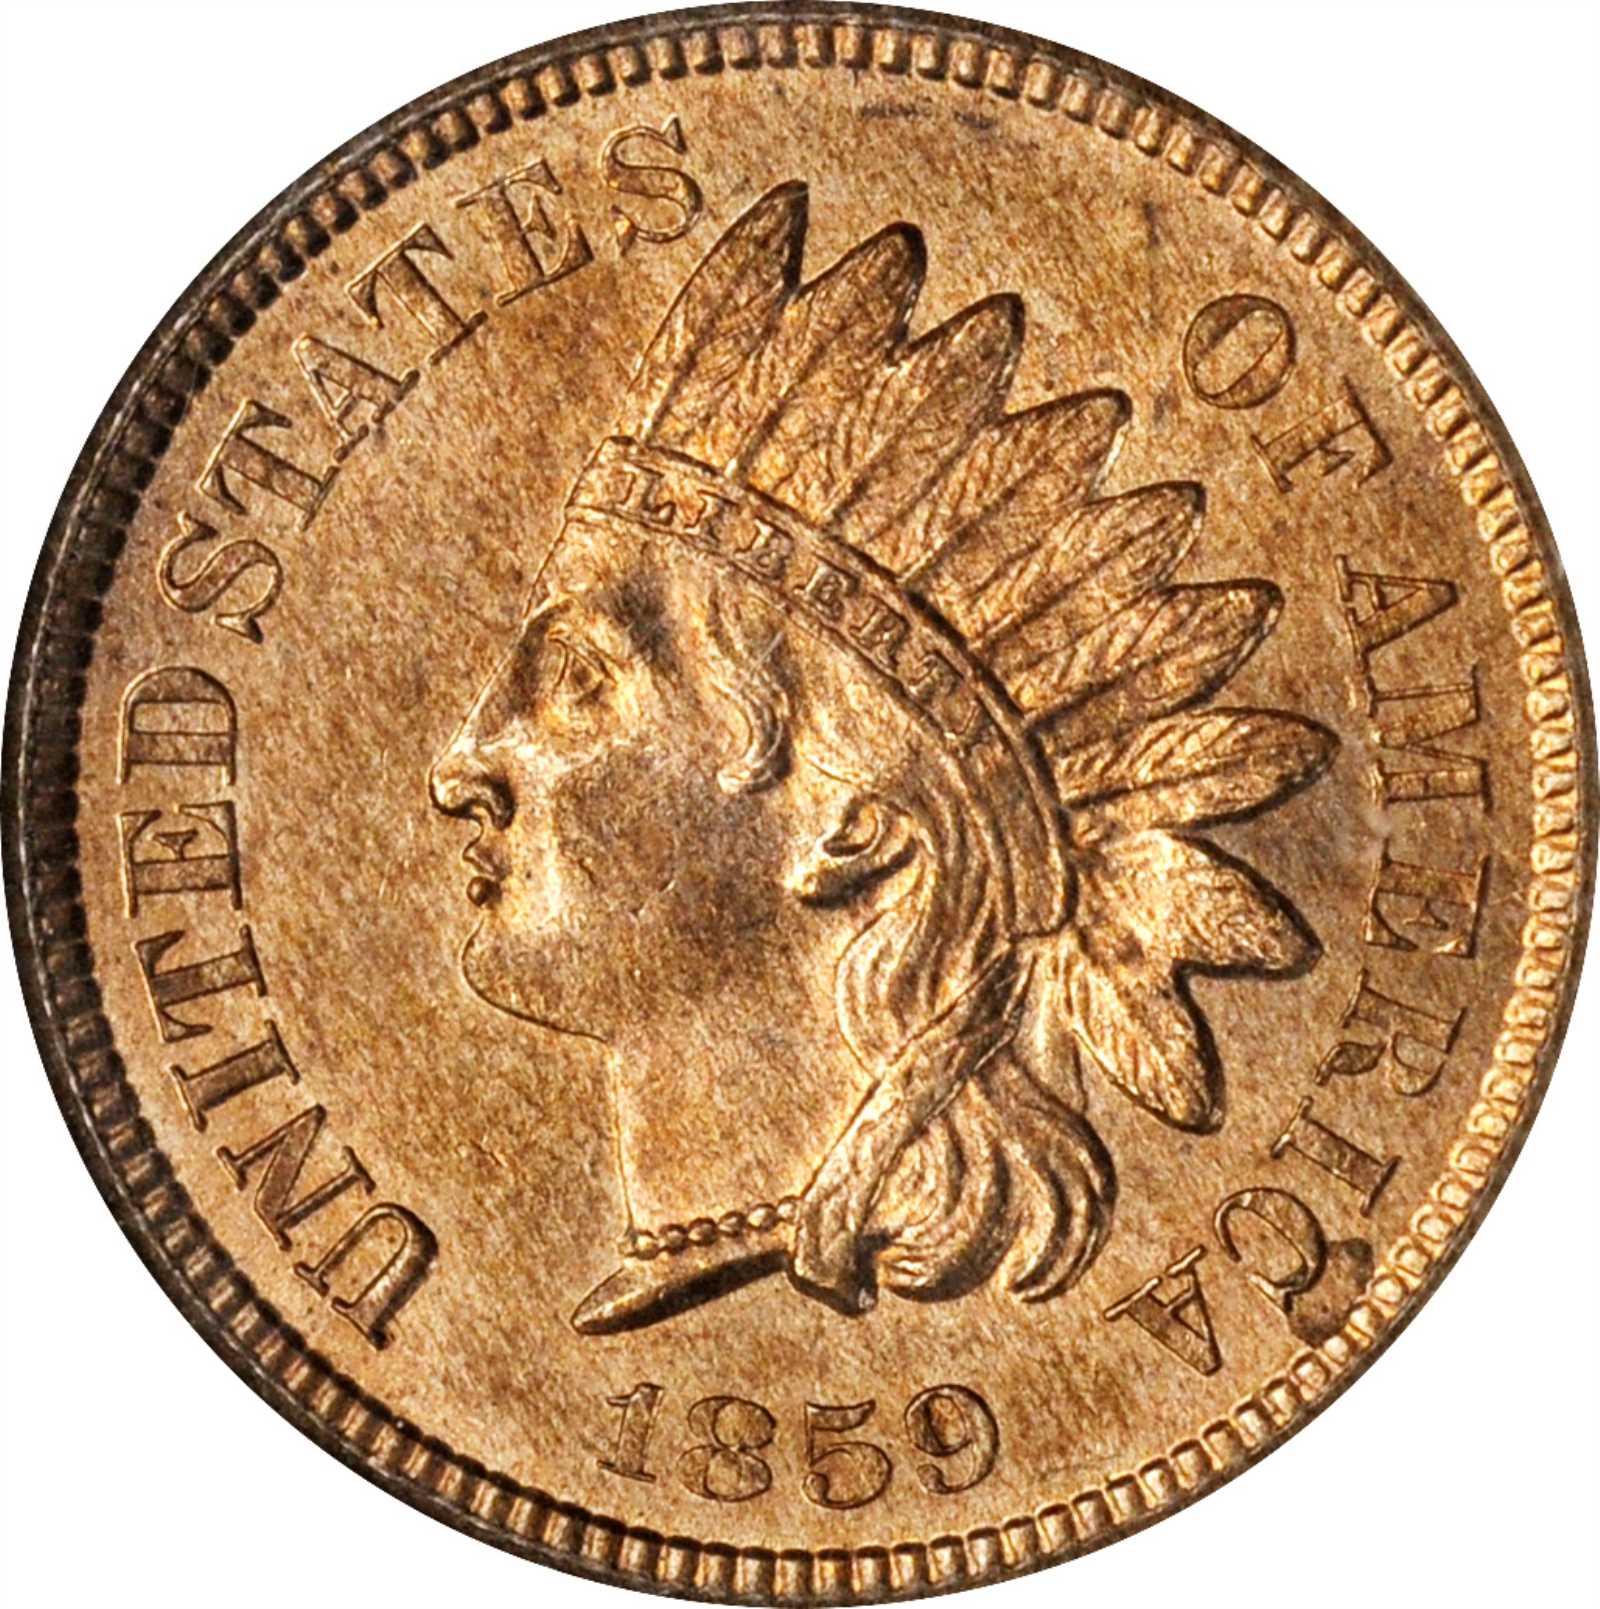 1859 Indian Head Cent : A Collector's Guide